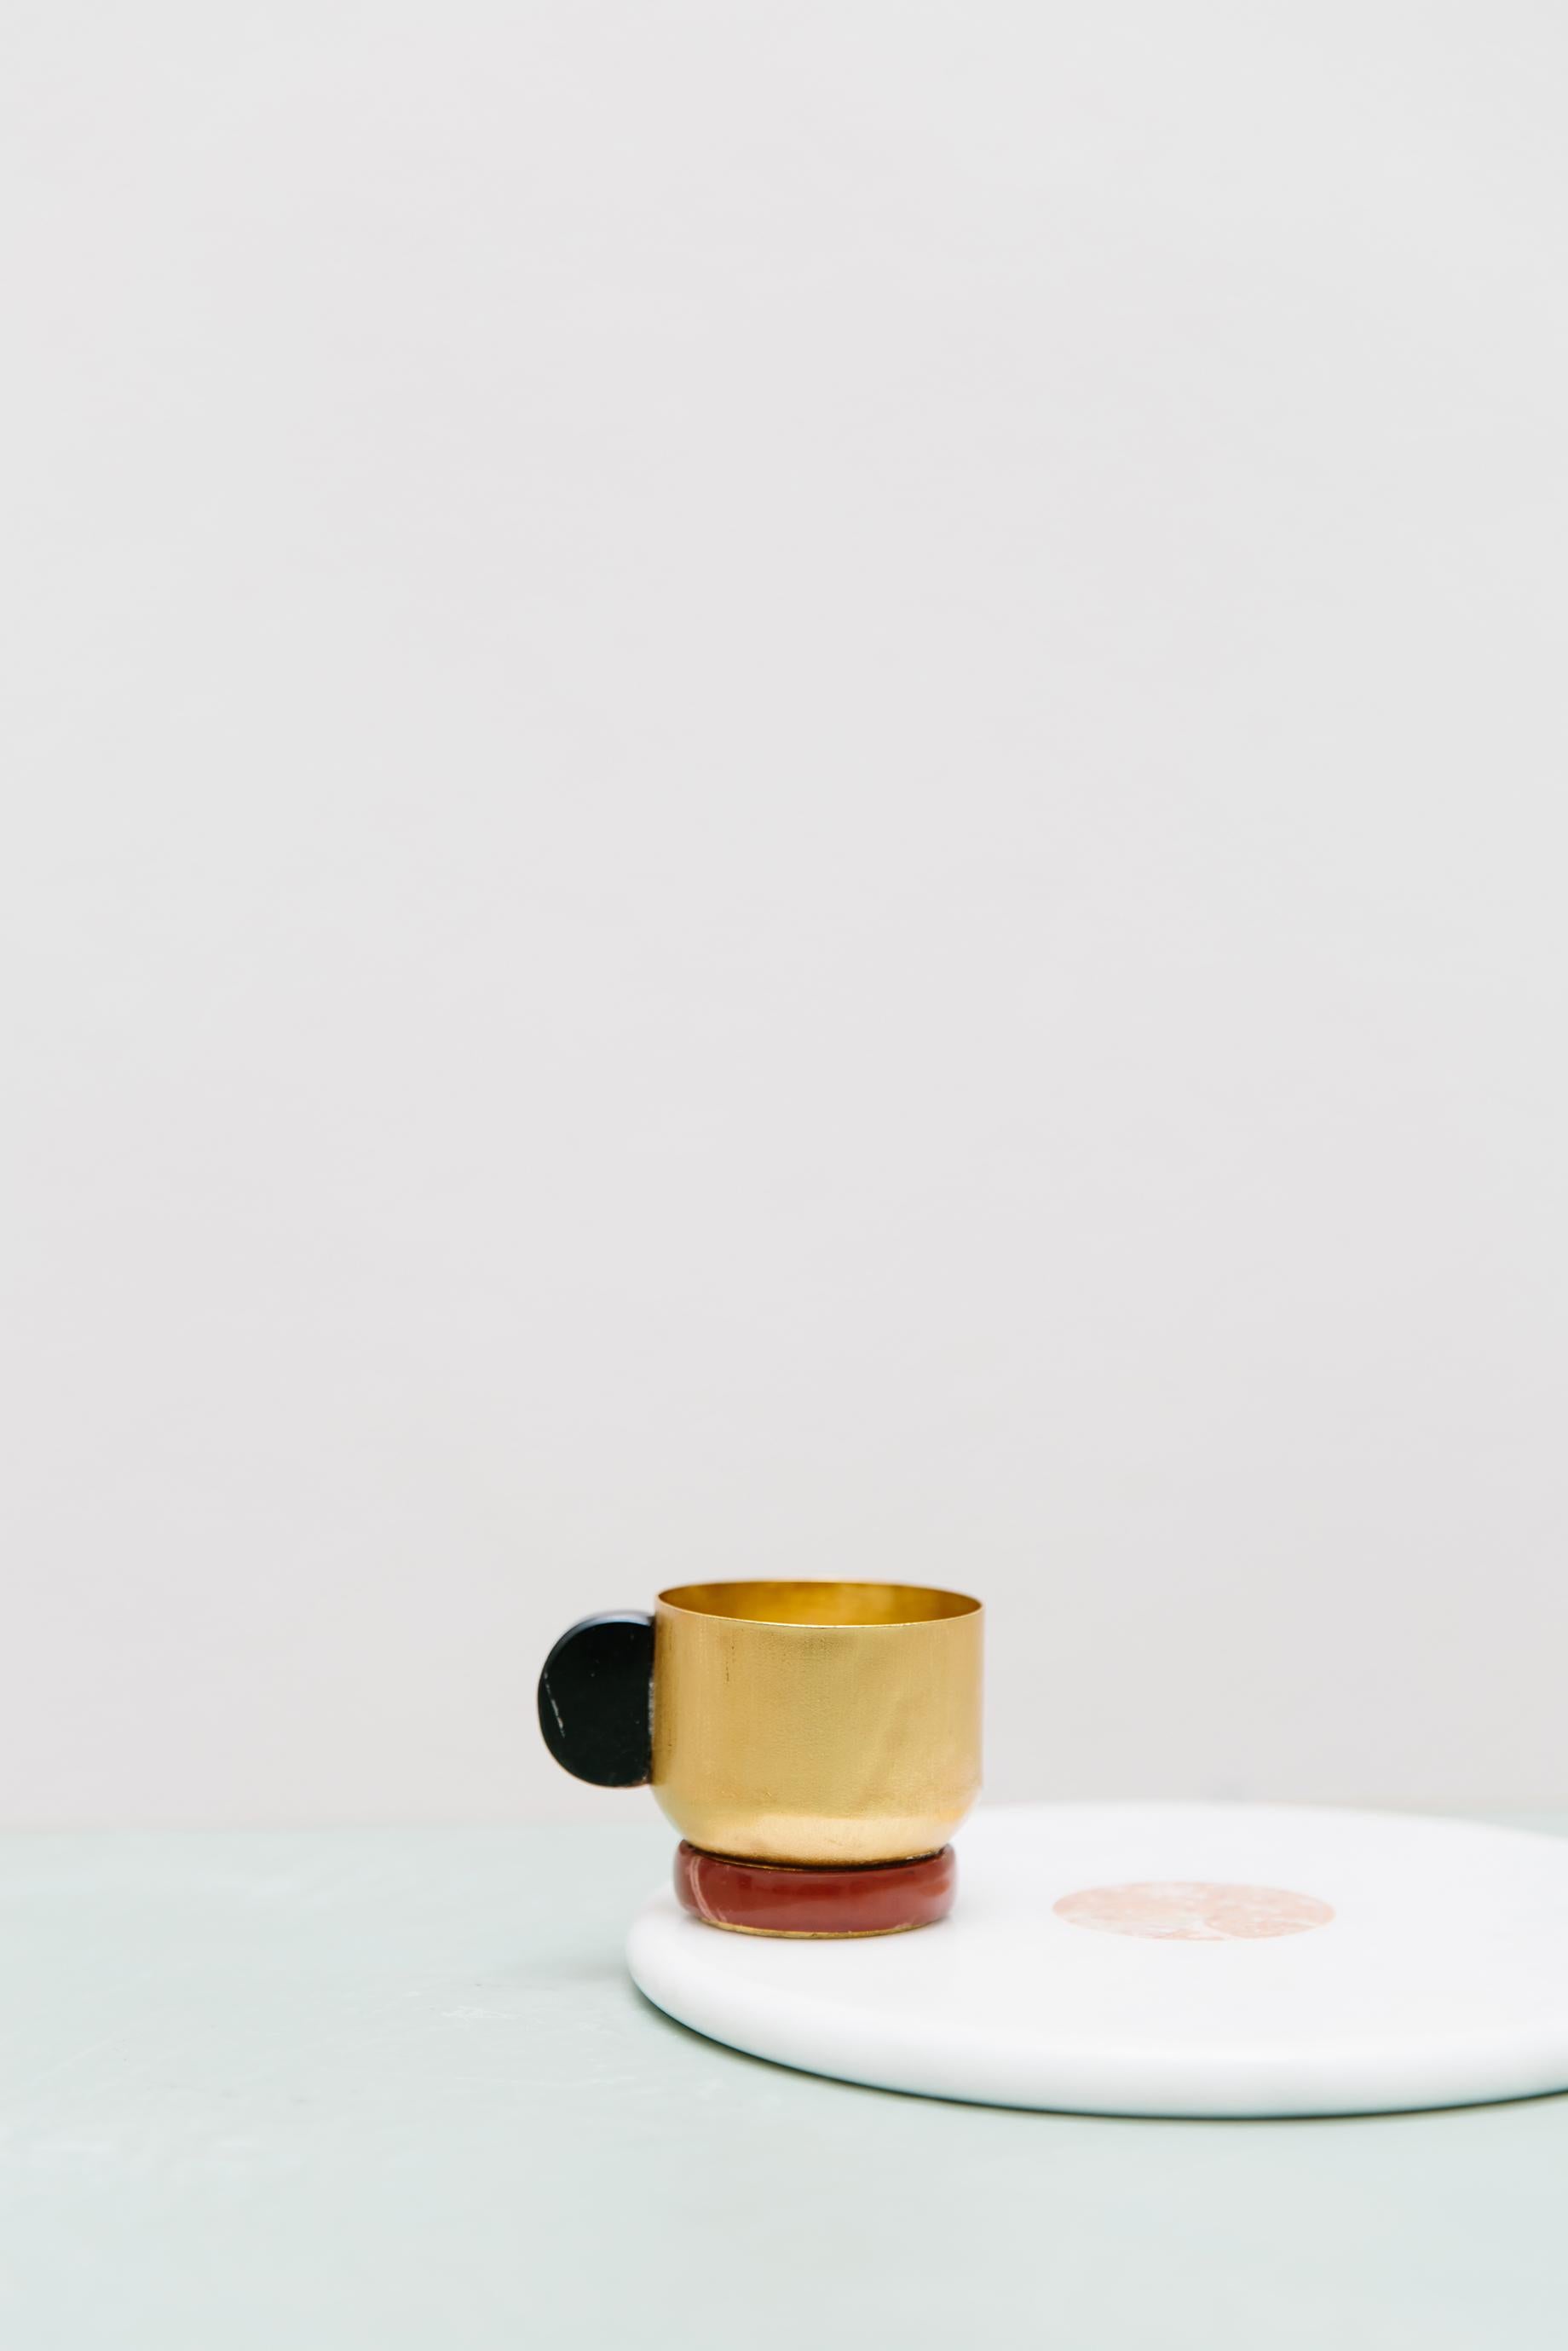 Italian Contemporary Gold Plated Tea Cup Onyx Stone Handle in Italy by Natalia Criado For Sale